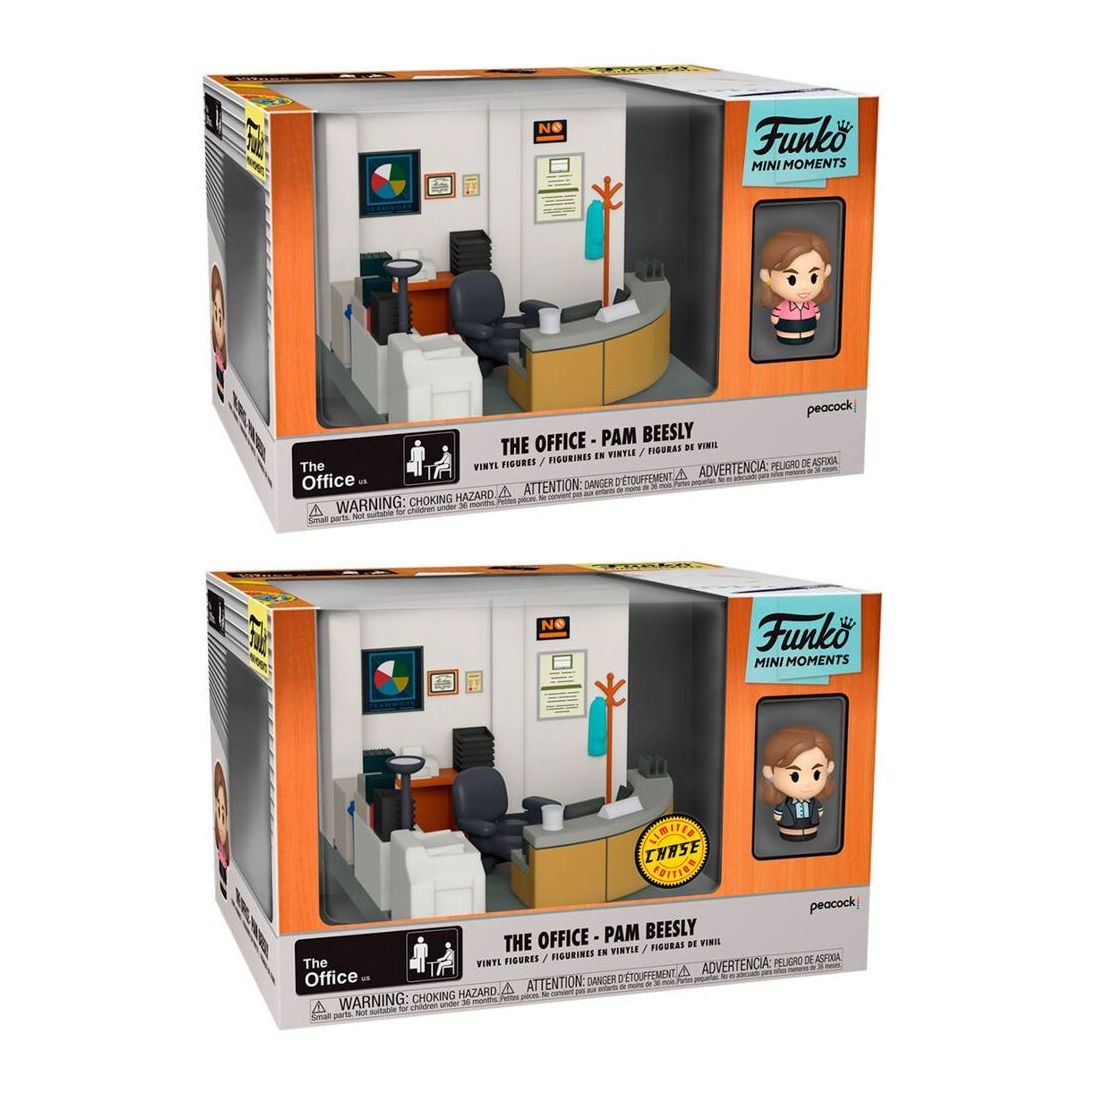 Funko Mini Moments The Office Pam Beesly Vinyl Figure (With Chase*)